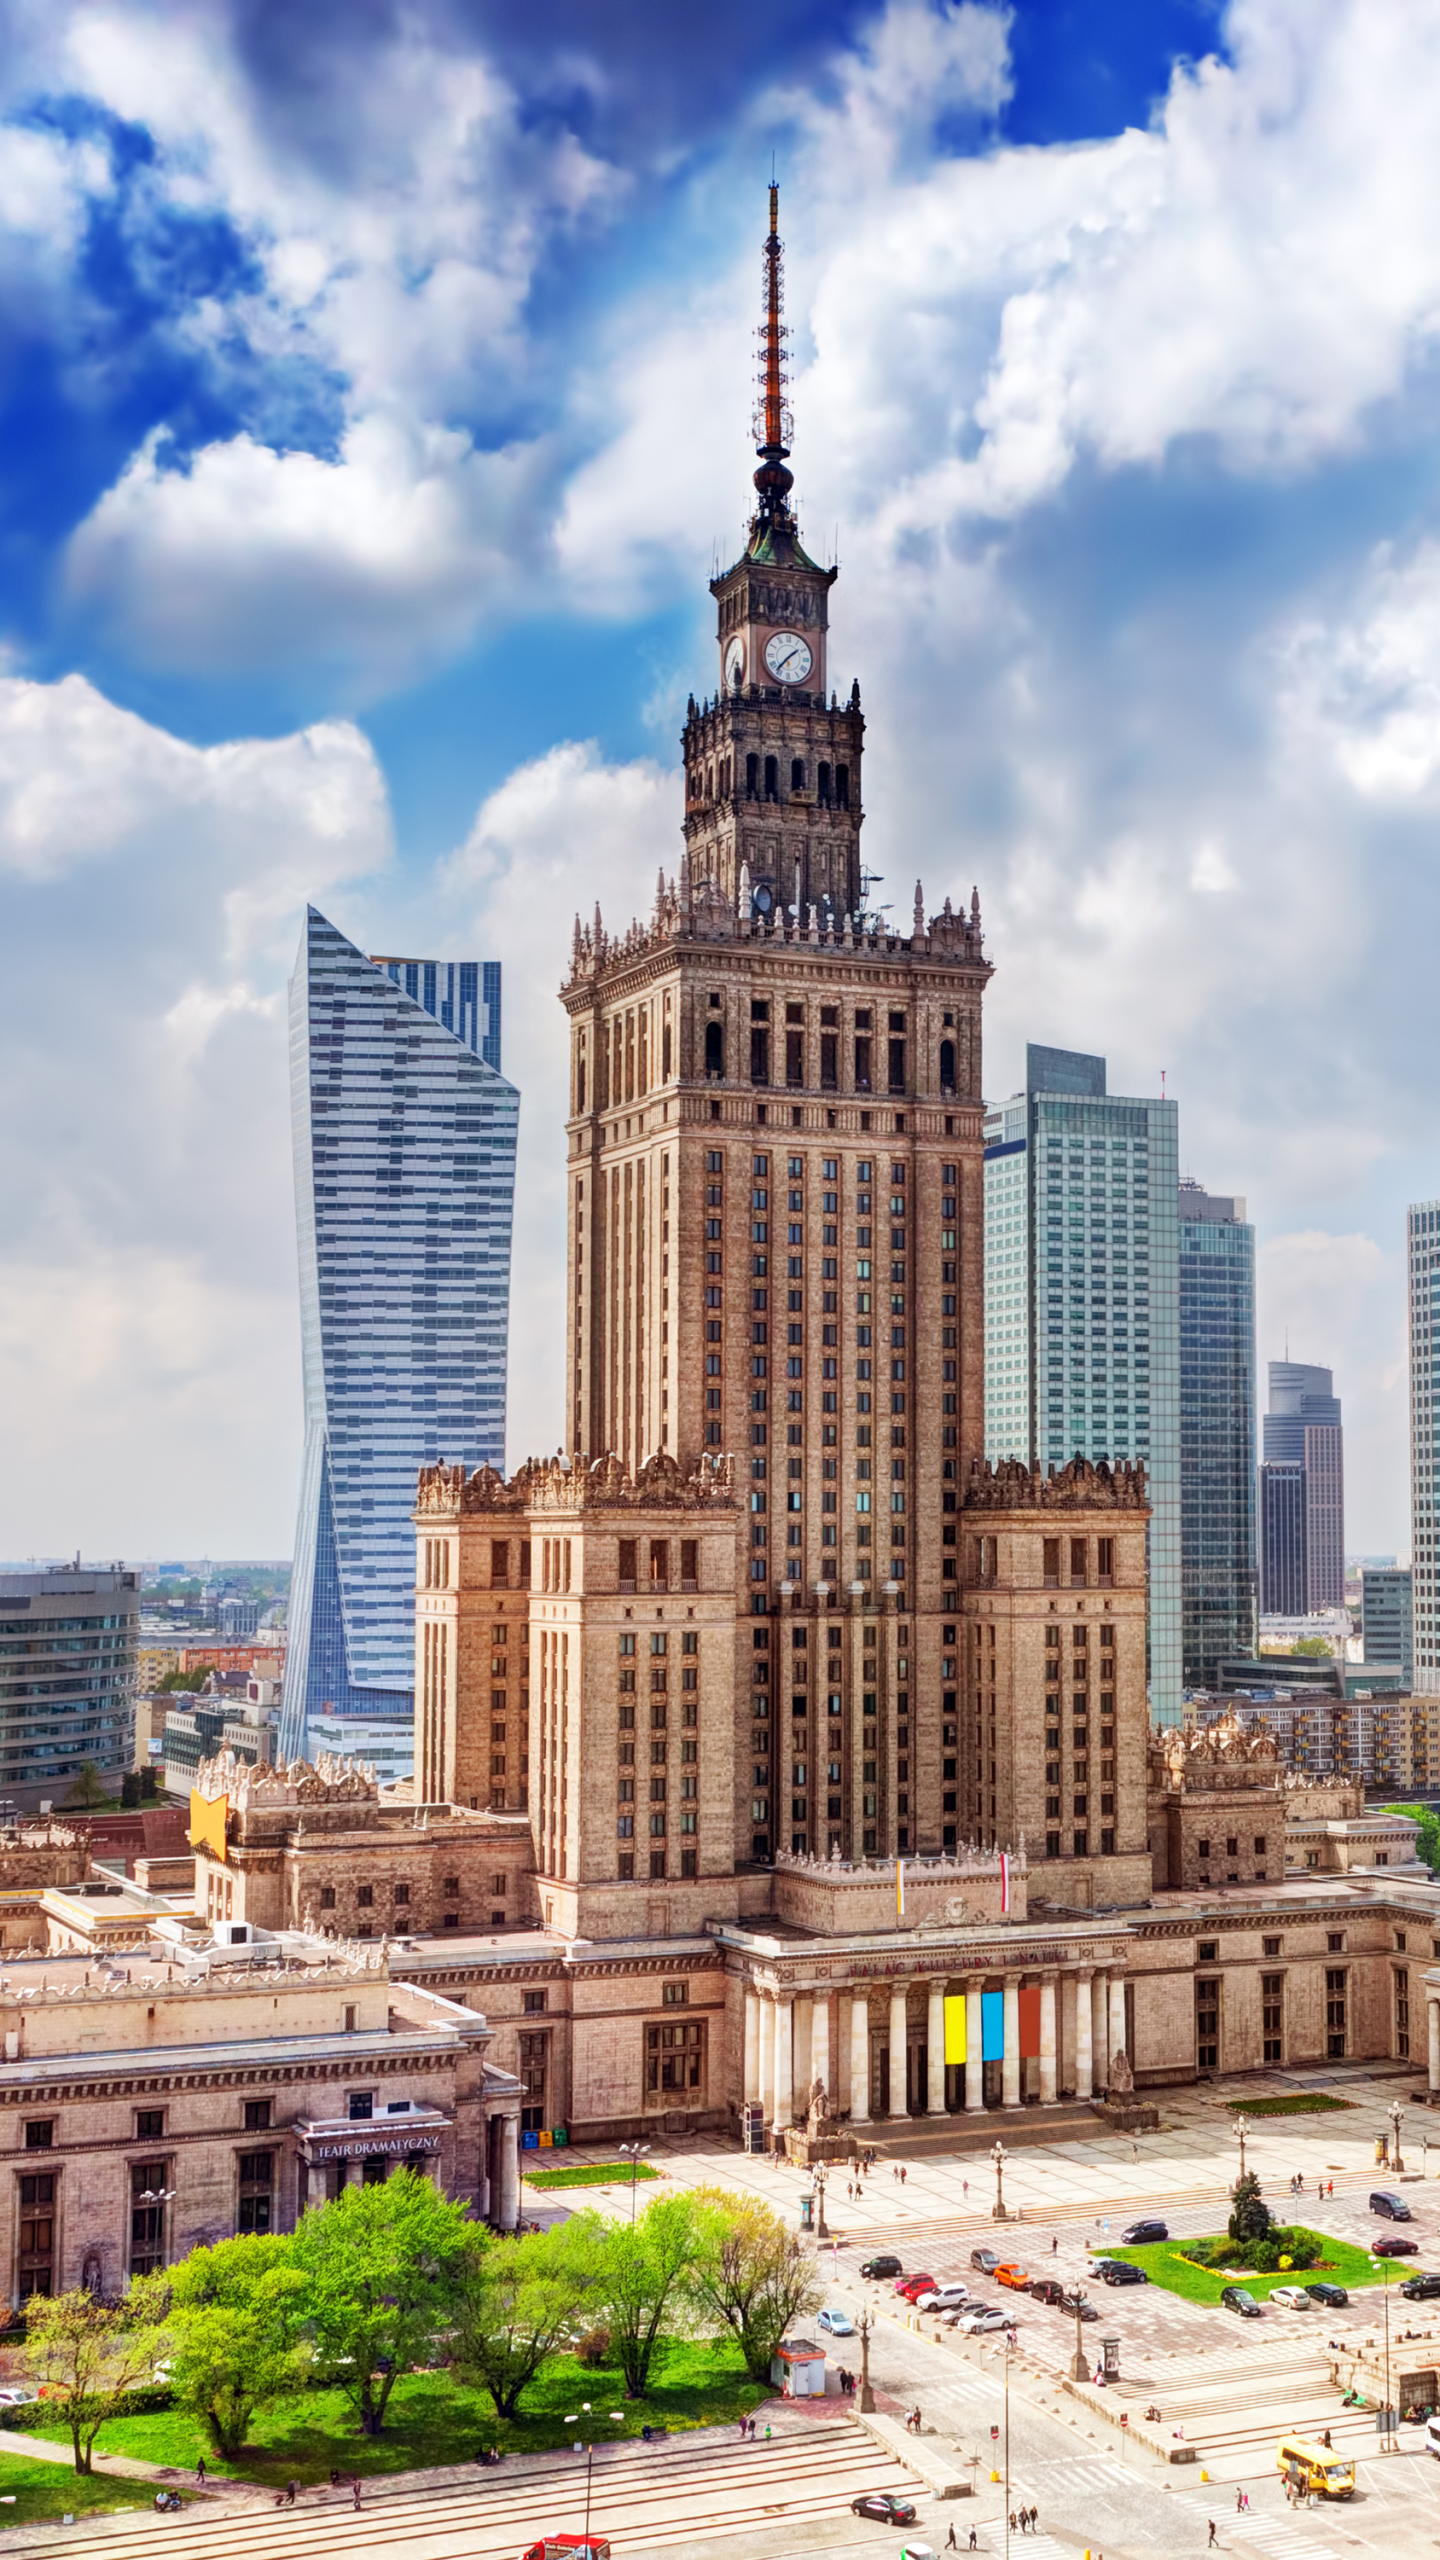 Warsaw Wallpapers